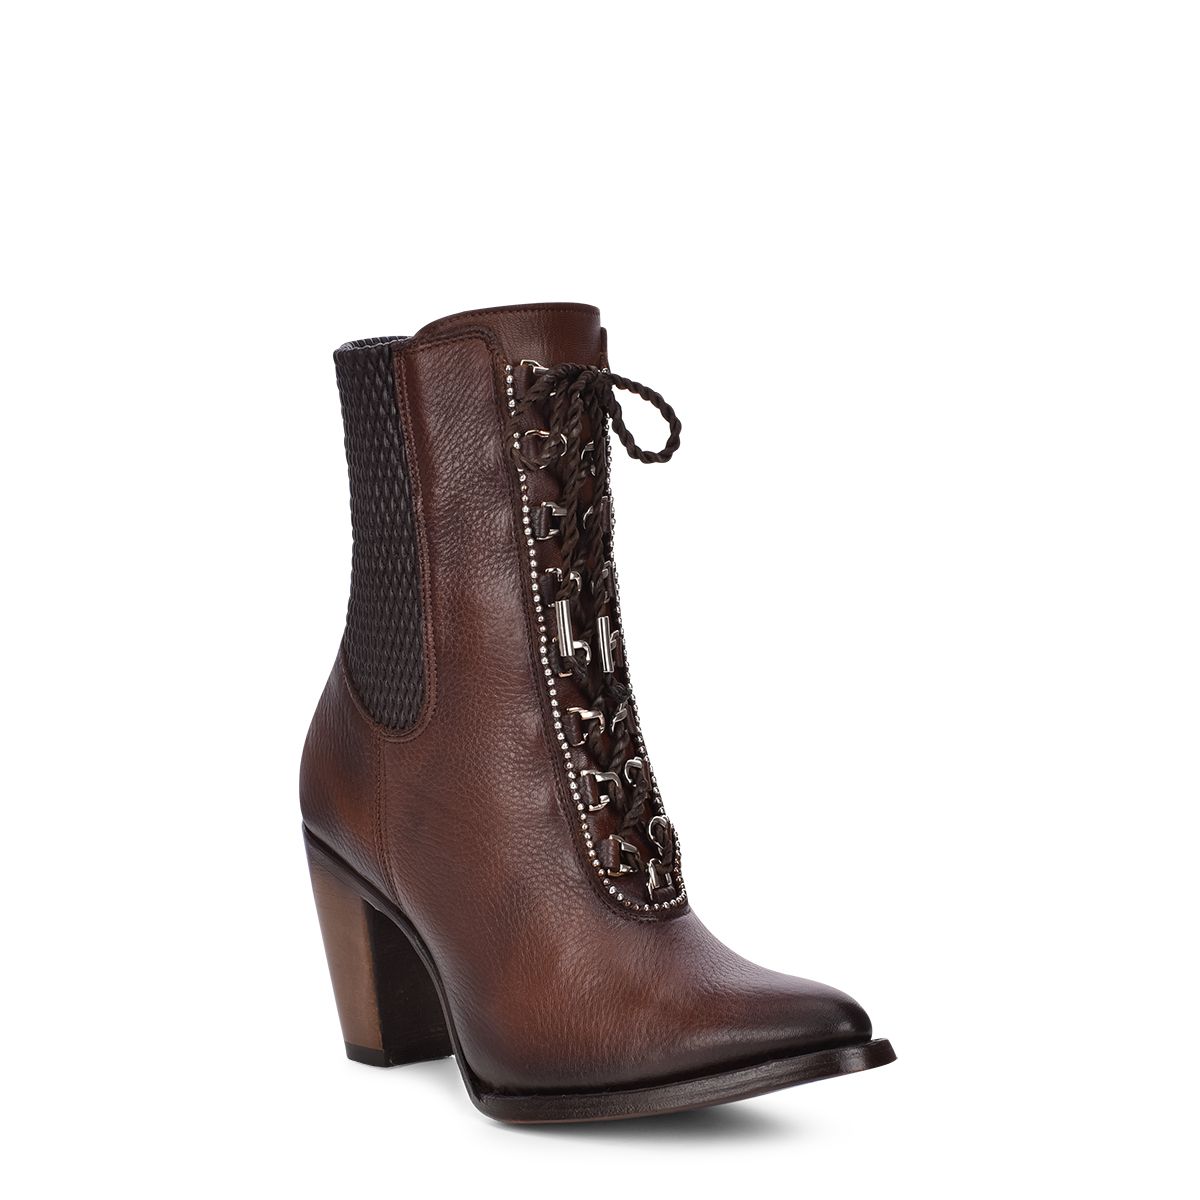 3F84RS - Cuadra chocolate Paris Texas cowboy leather ankle boots for women-Kuet.us